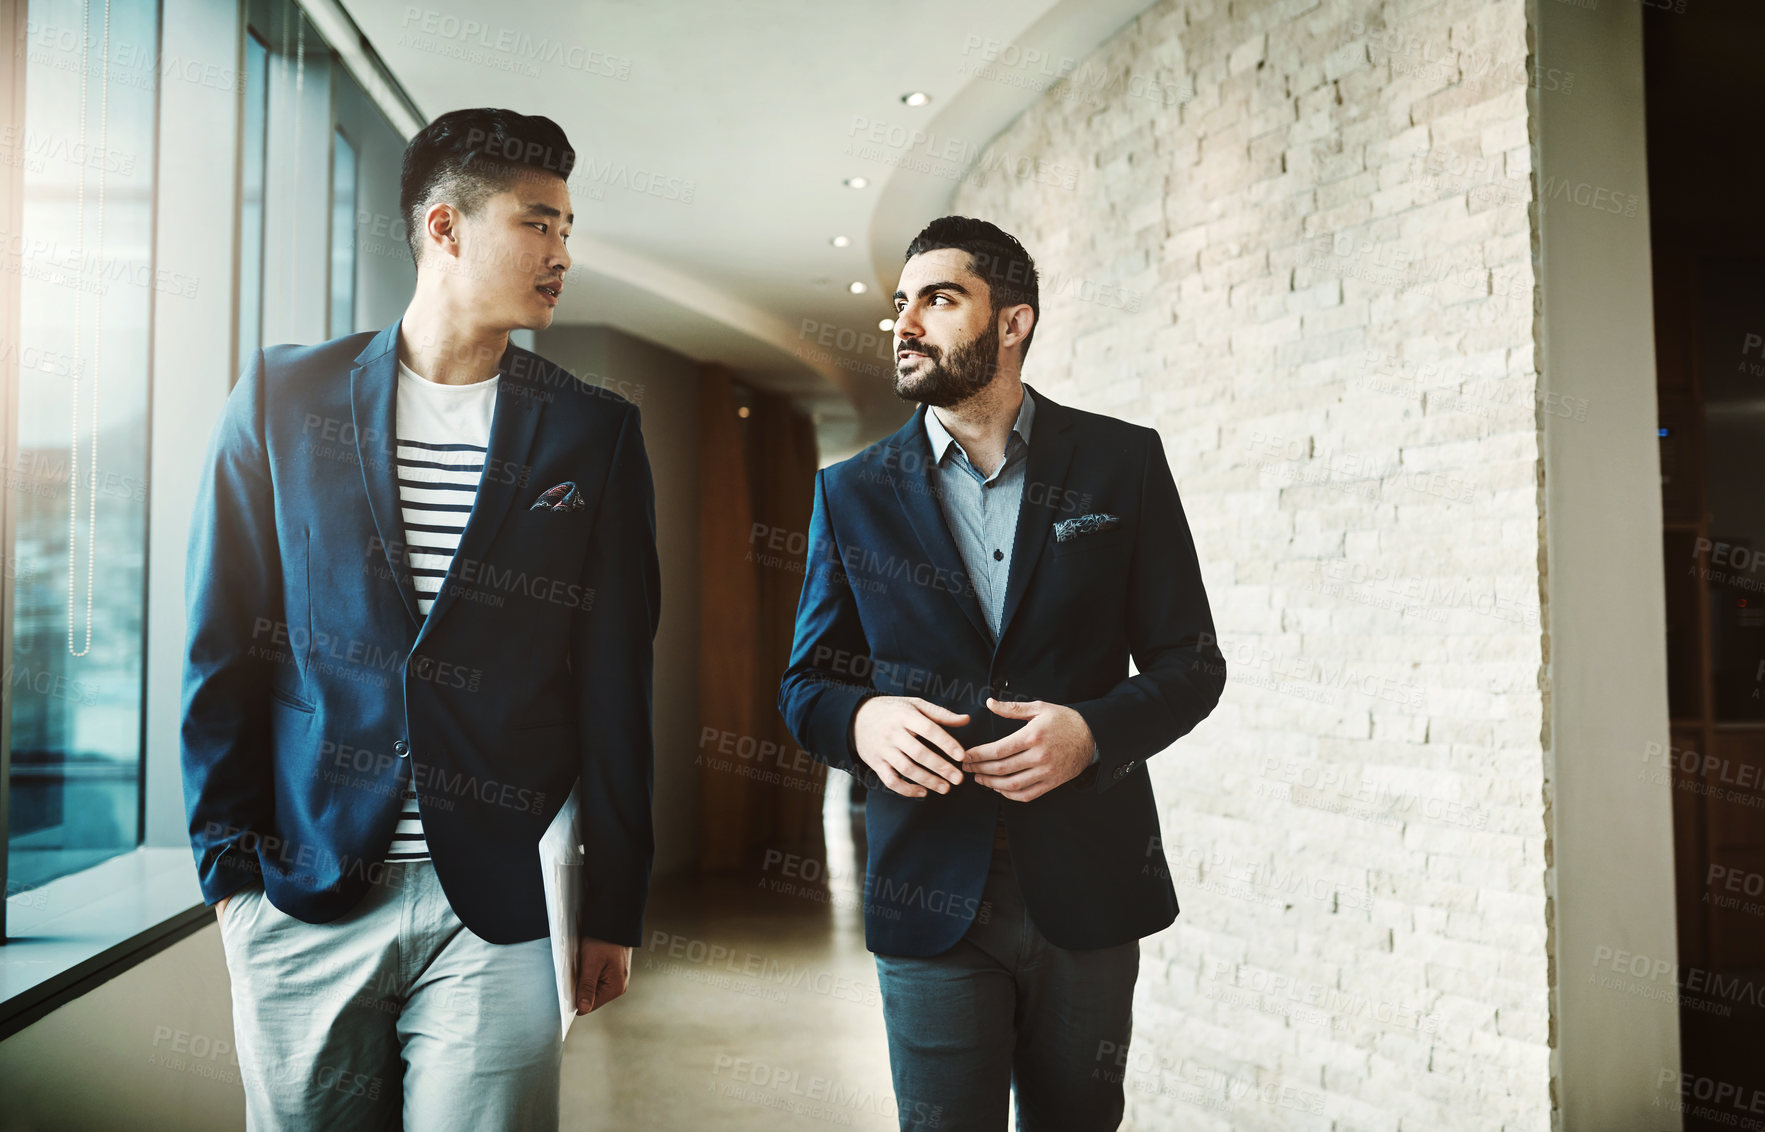 Buy stock photo Shot of two young businessmen walking and talking in a modern office